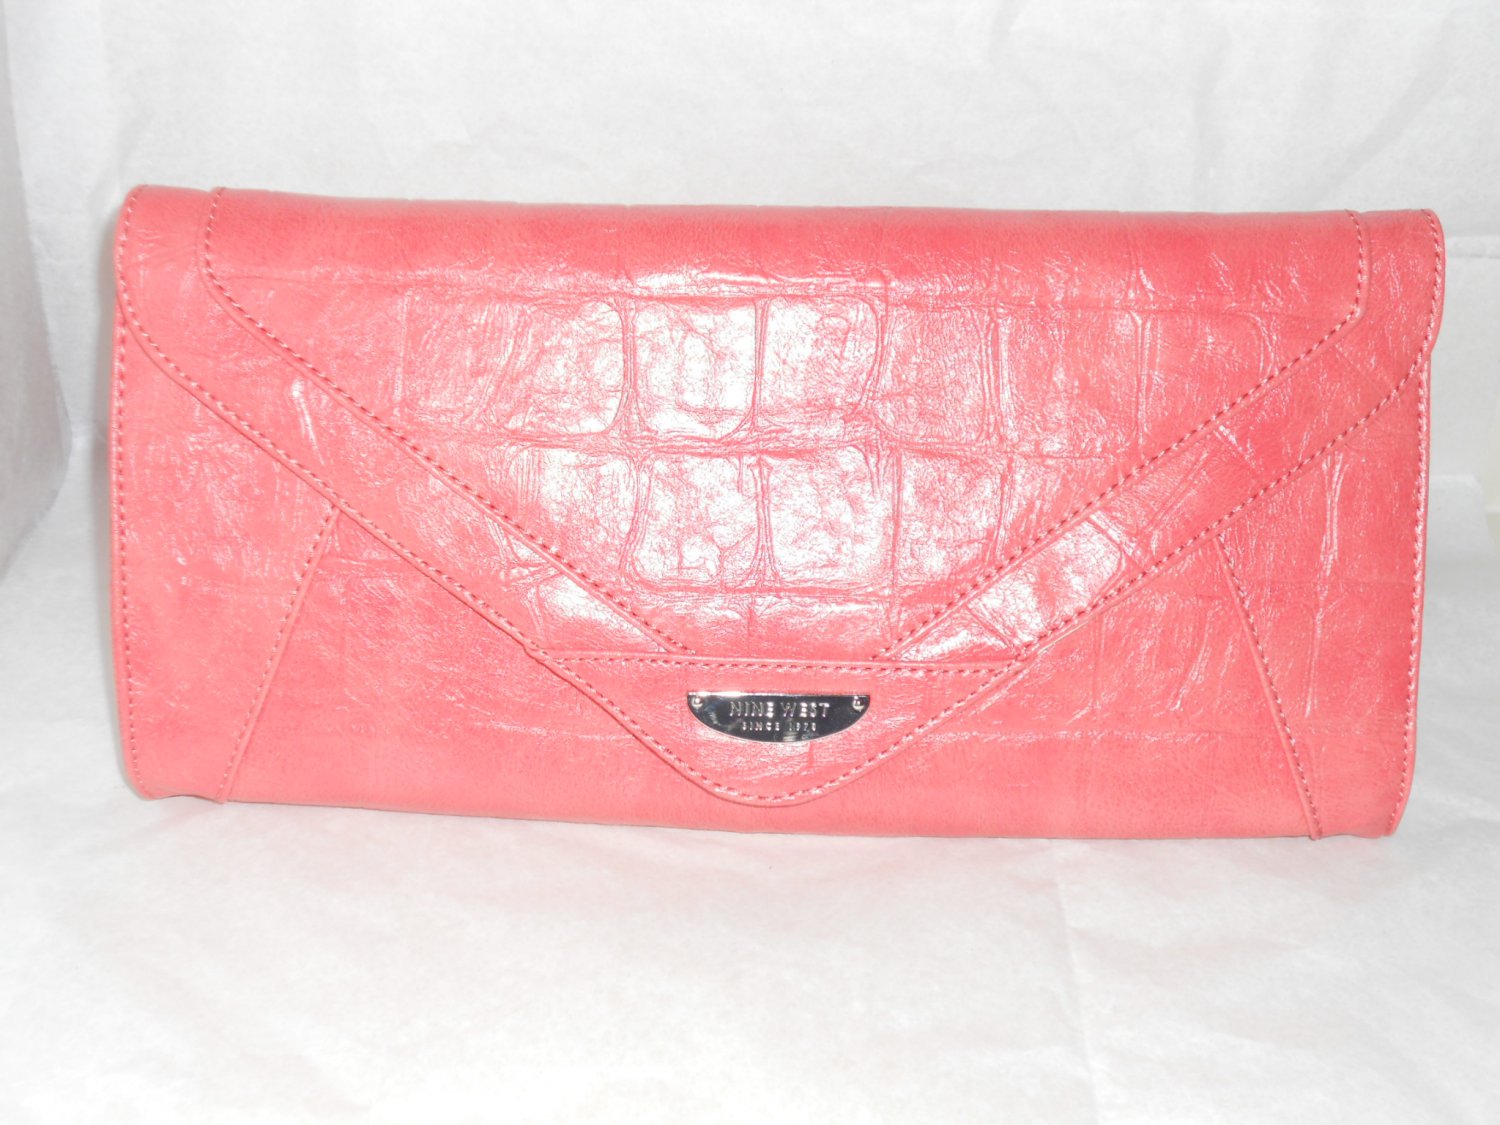 NEW ARRIVAL NINE WEST CLUTCH EVENING BAG IN CORAL